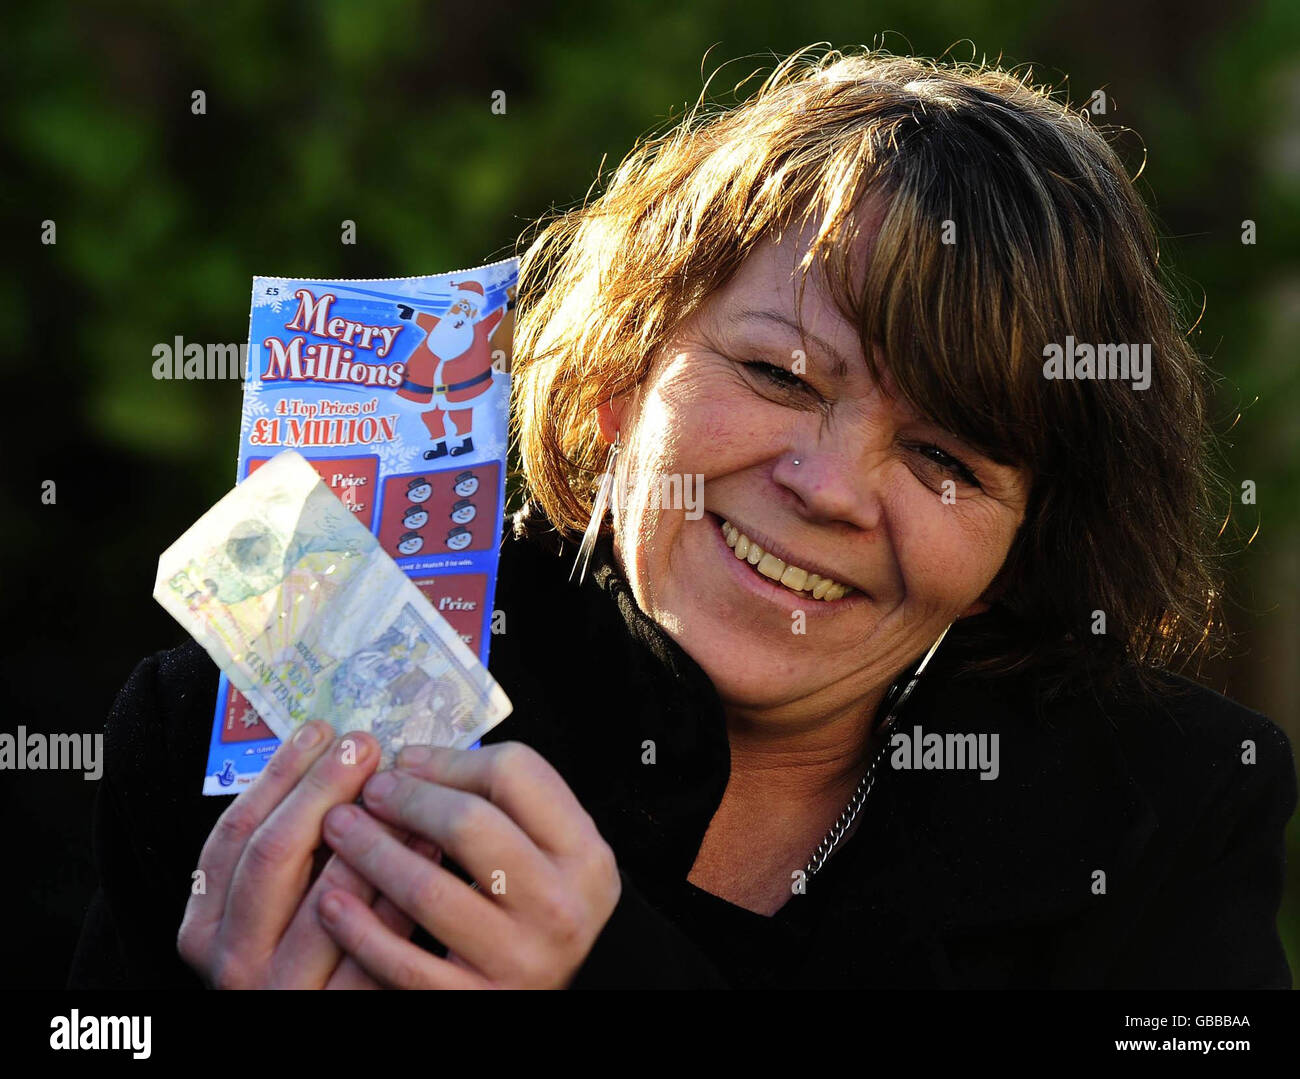 Maria Murray, 41, from Avonmouth, Bristol, celebrates her one million pound scratchcard win at a presentation ceremony near Doncaster. Stock Photo